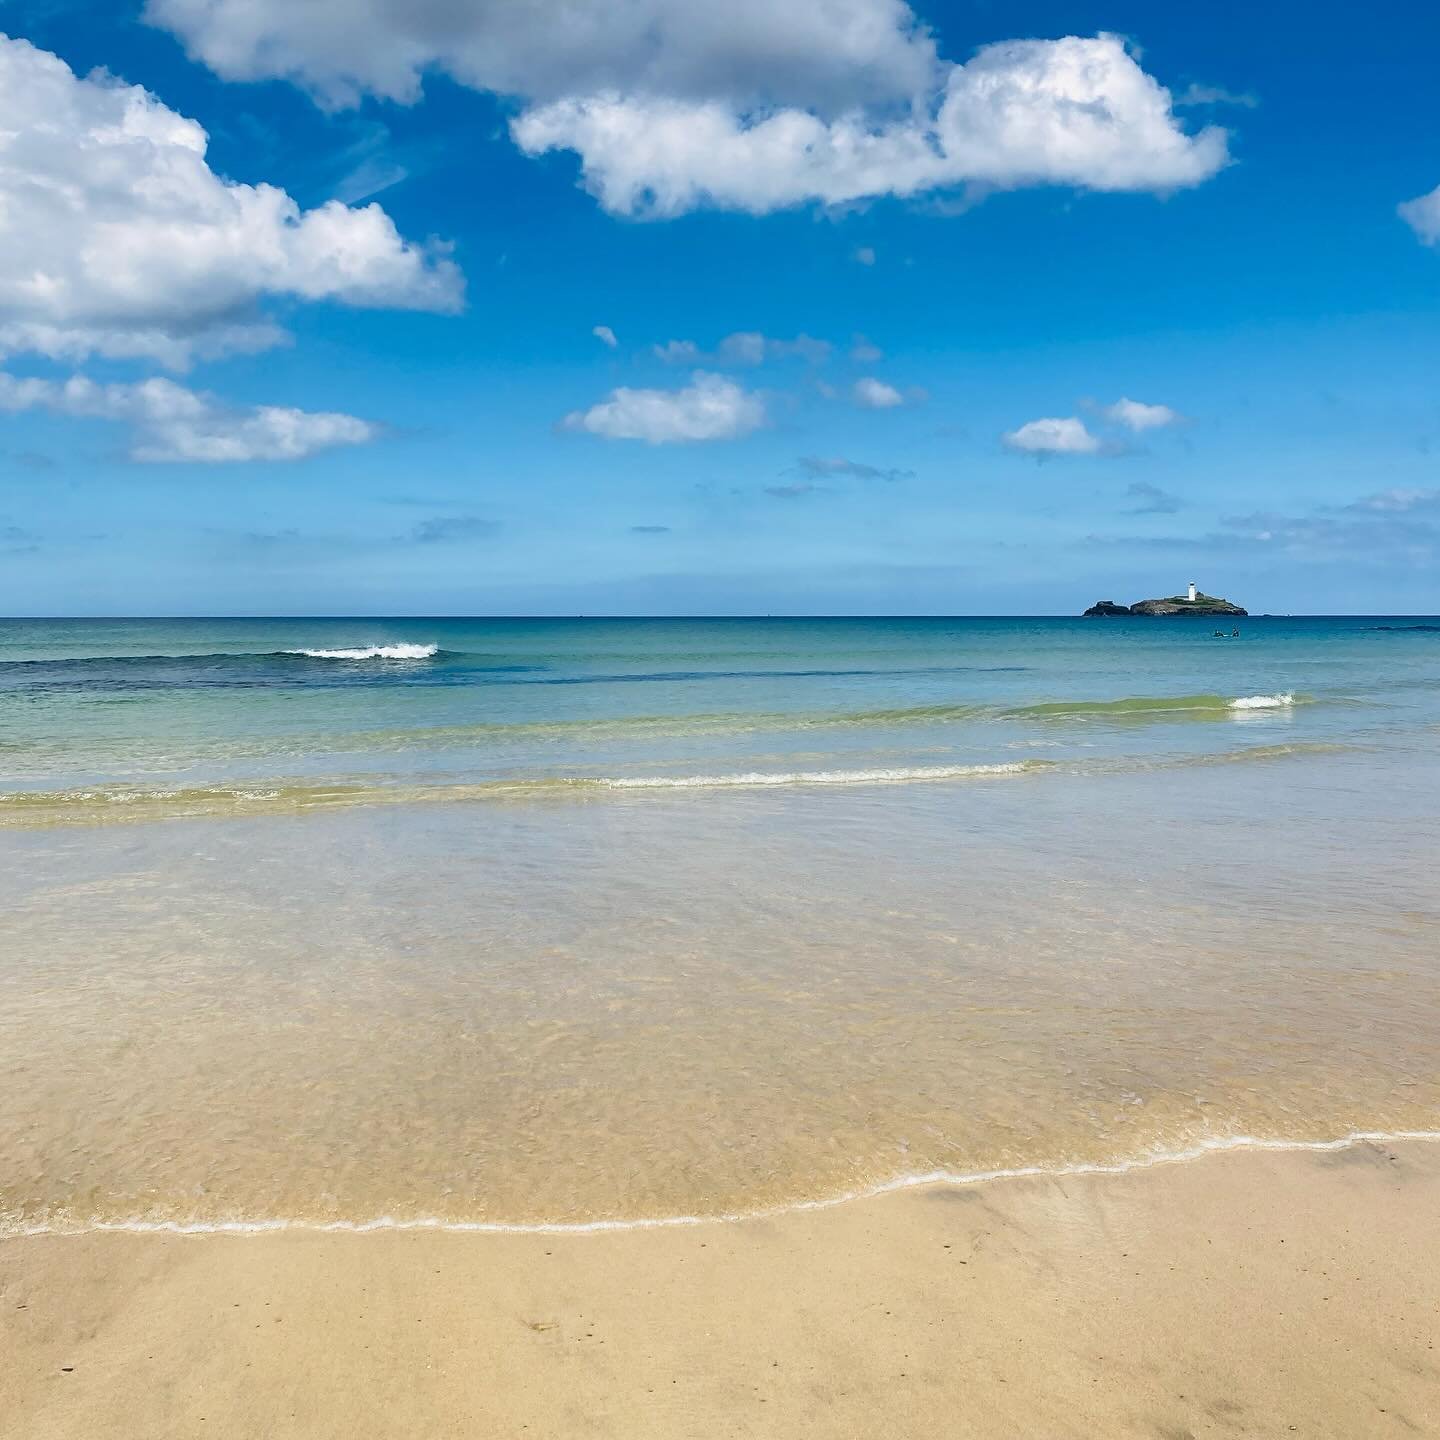 I can hardly believe I was there 🌊✍️🐚 And that it&rsquo;s carrying on without me 😢 

#cornishcoast #gwithian #theshellhousedetectives #writingretreat #creativeinspiration #writinglife #authorsofinstagram #igauthors #ilovecornwall #cornwall